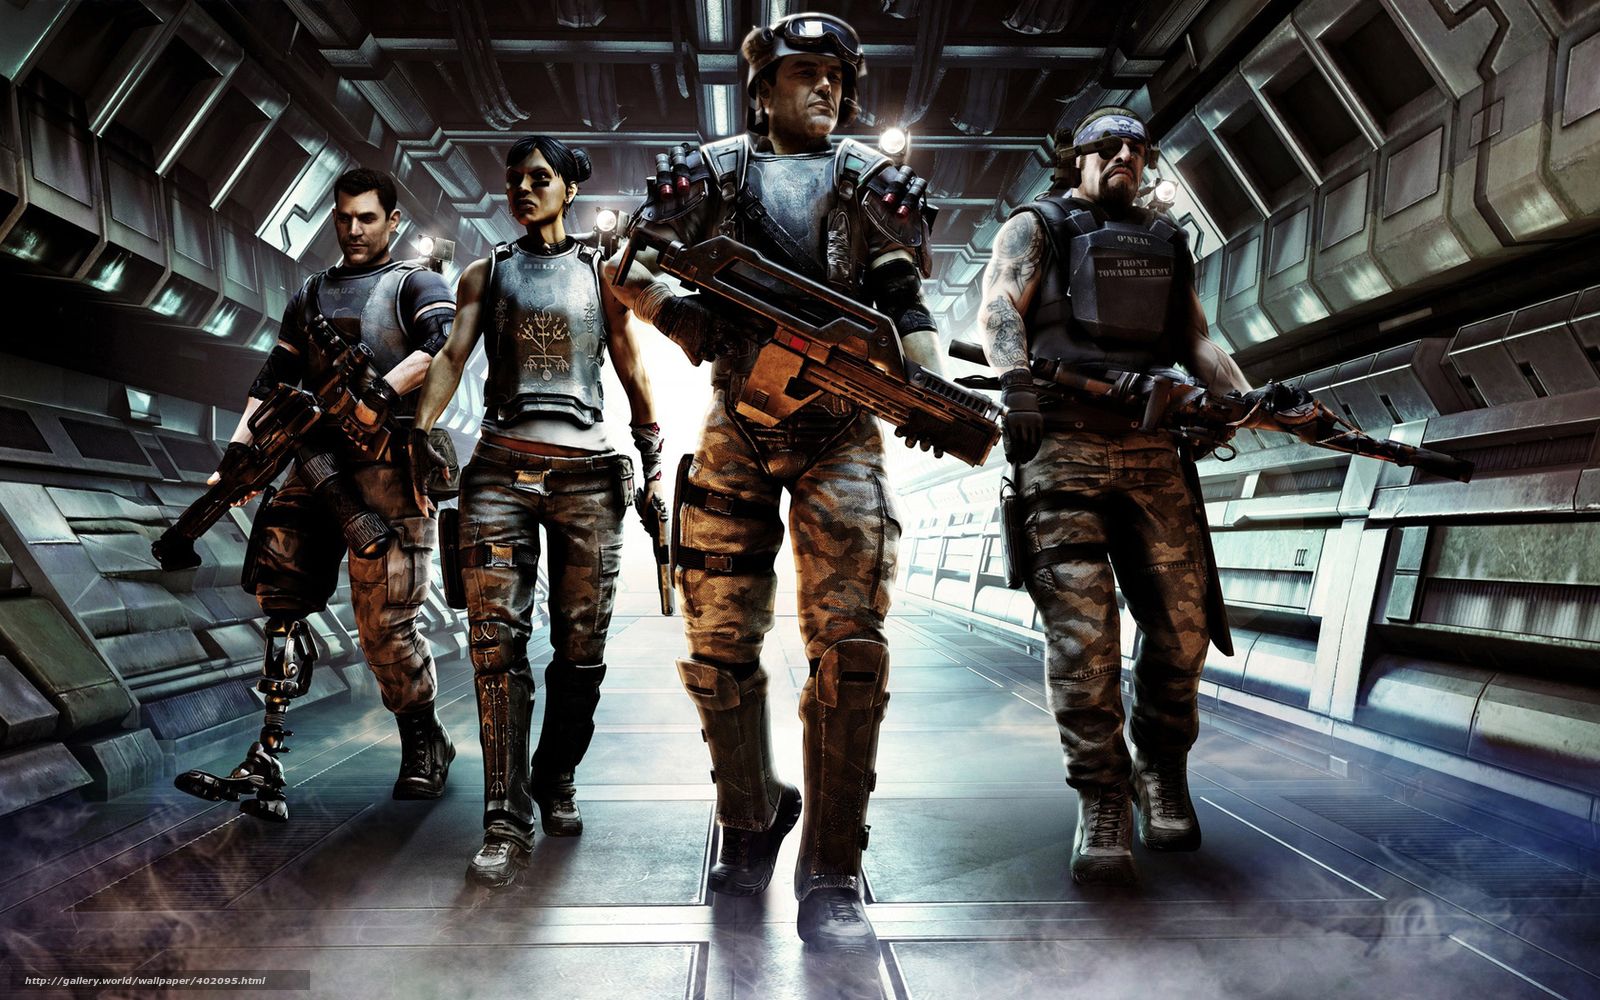 Download wallpaper Aliens: Colonial Marines, Soldiers, fighters, Marines free desktop wallpaper in the resolution 1680x1050